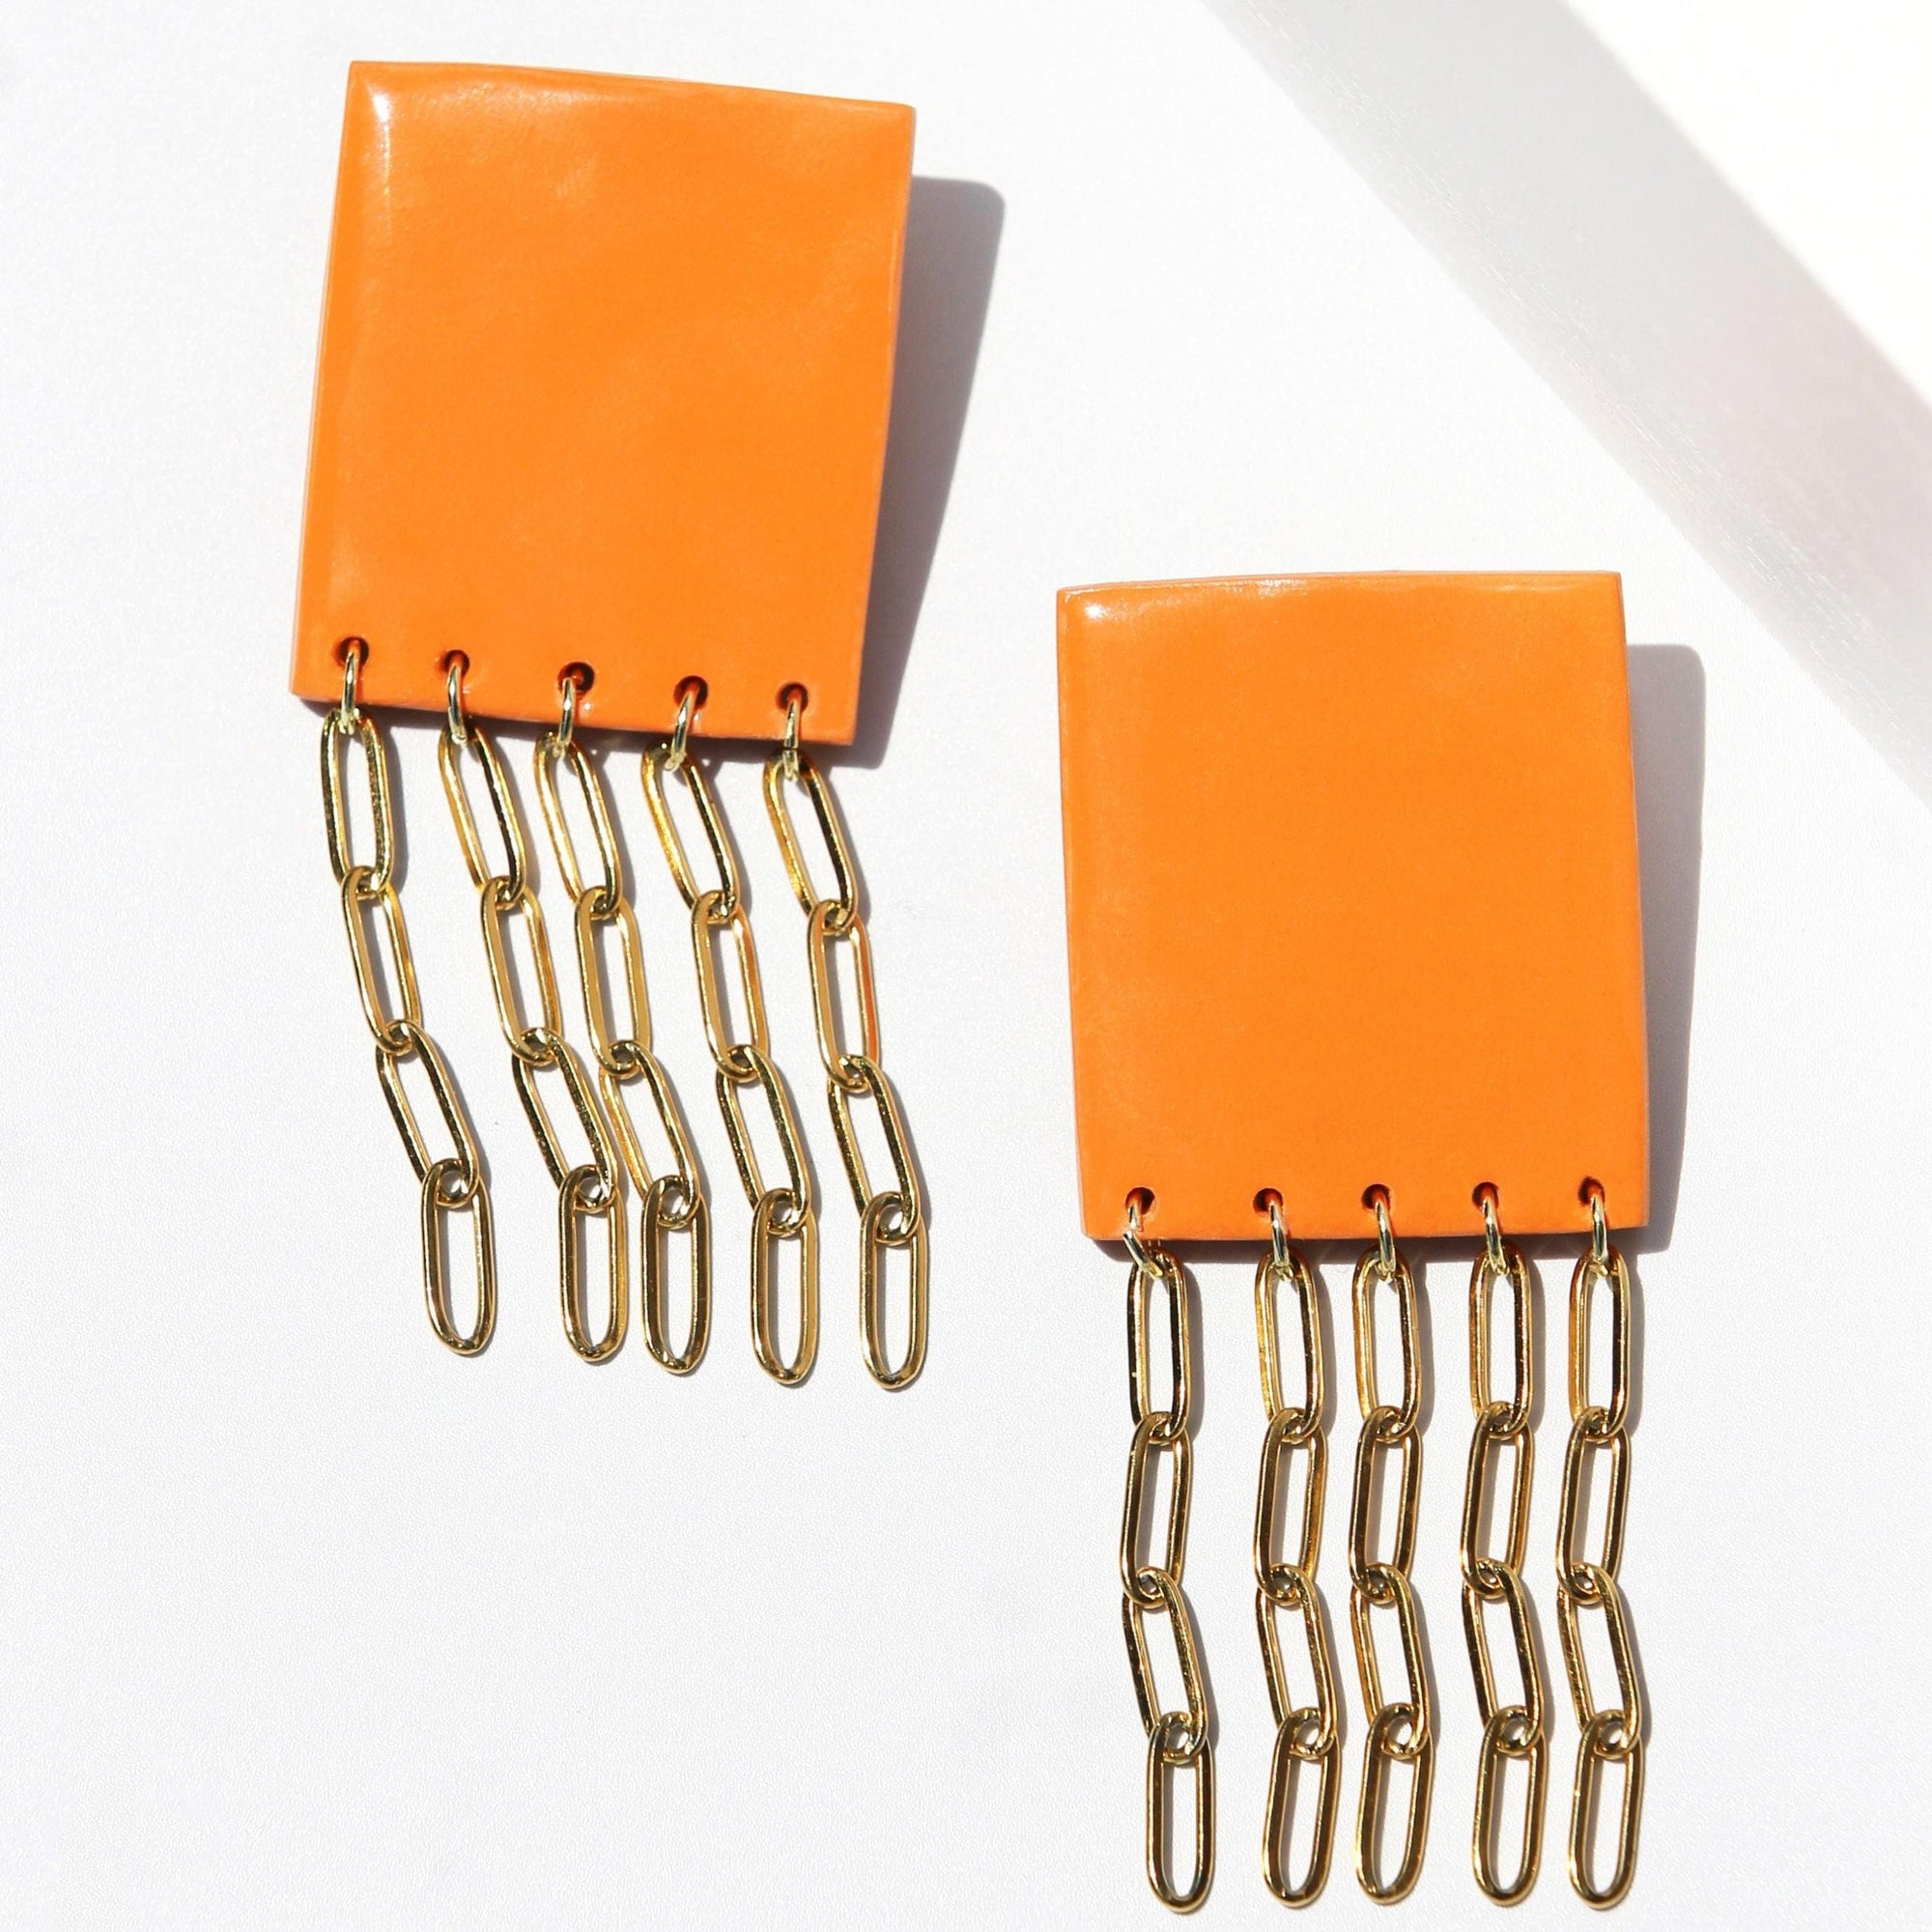 create your own mis-match earrings